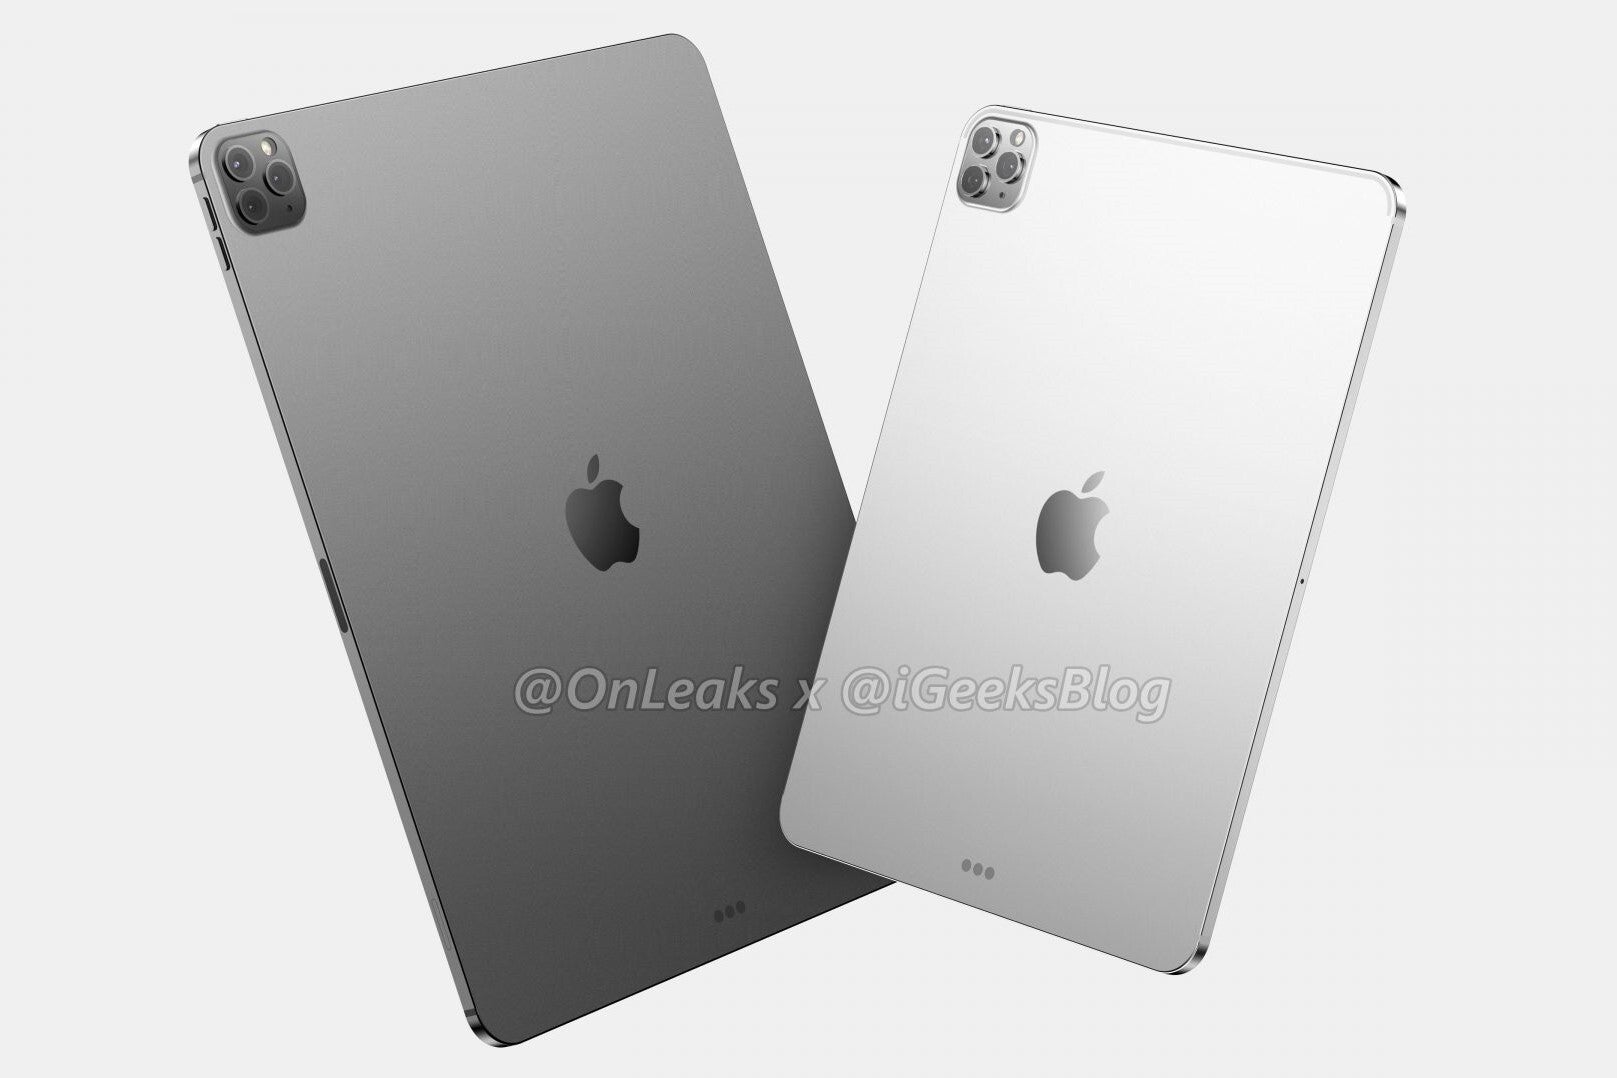  2020 iPad Pro series CAD-based render - Apple's first 5G iPad Pro could arrive as early as this year